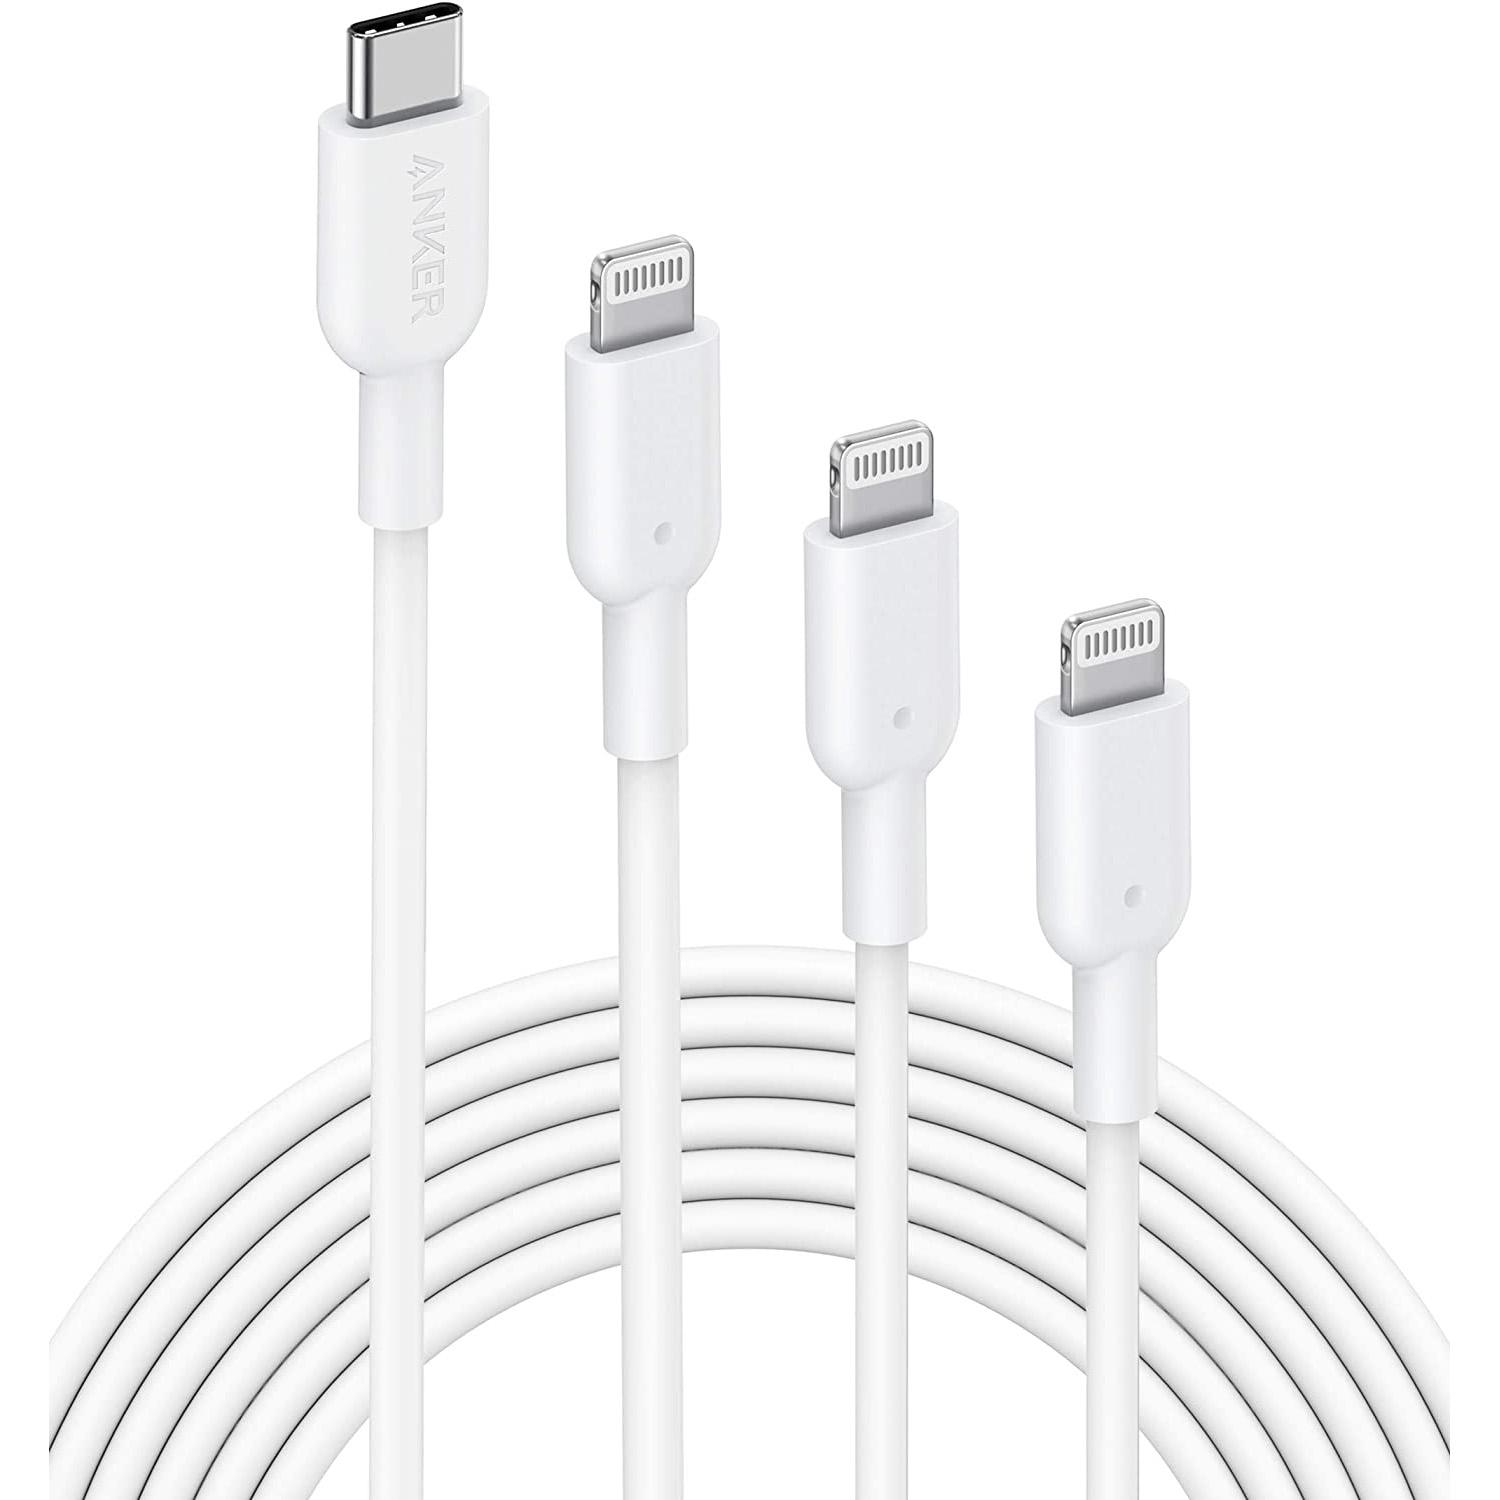 Anker USB C to Apple Lightning Cable 3-Pack for $19.99 Shipped